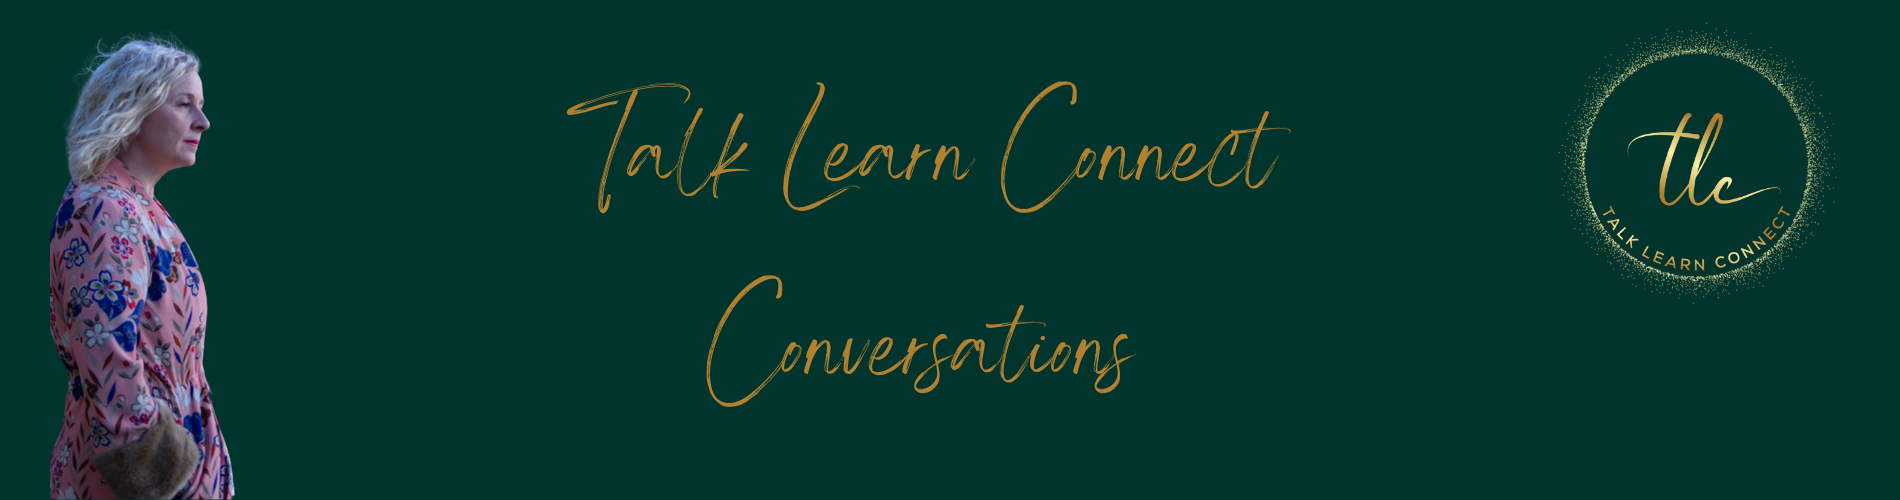 Talk Learn Connect Conversations